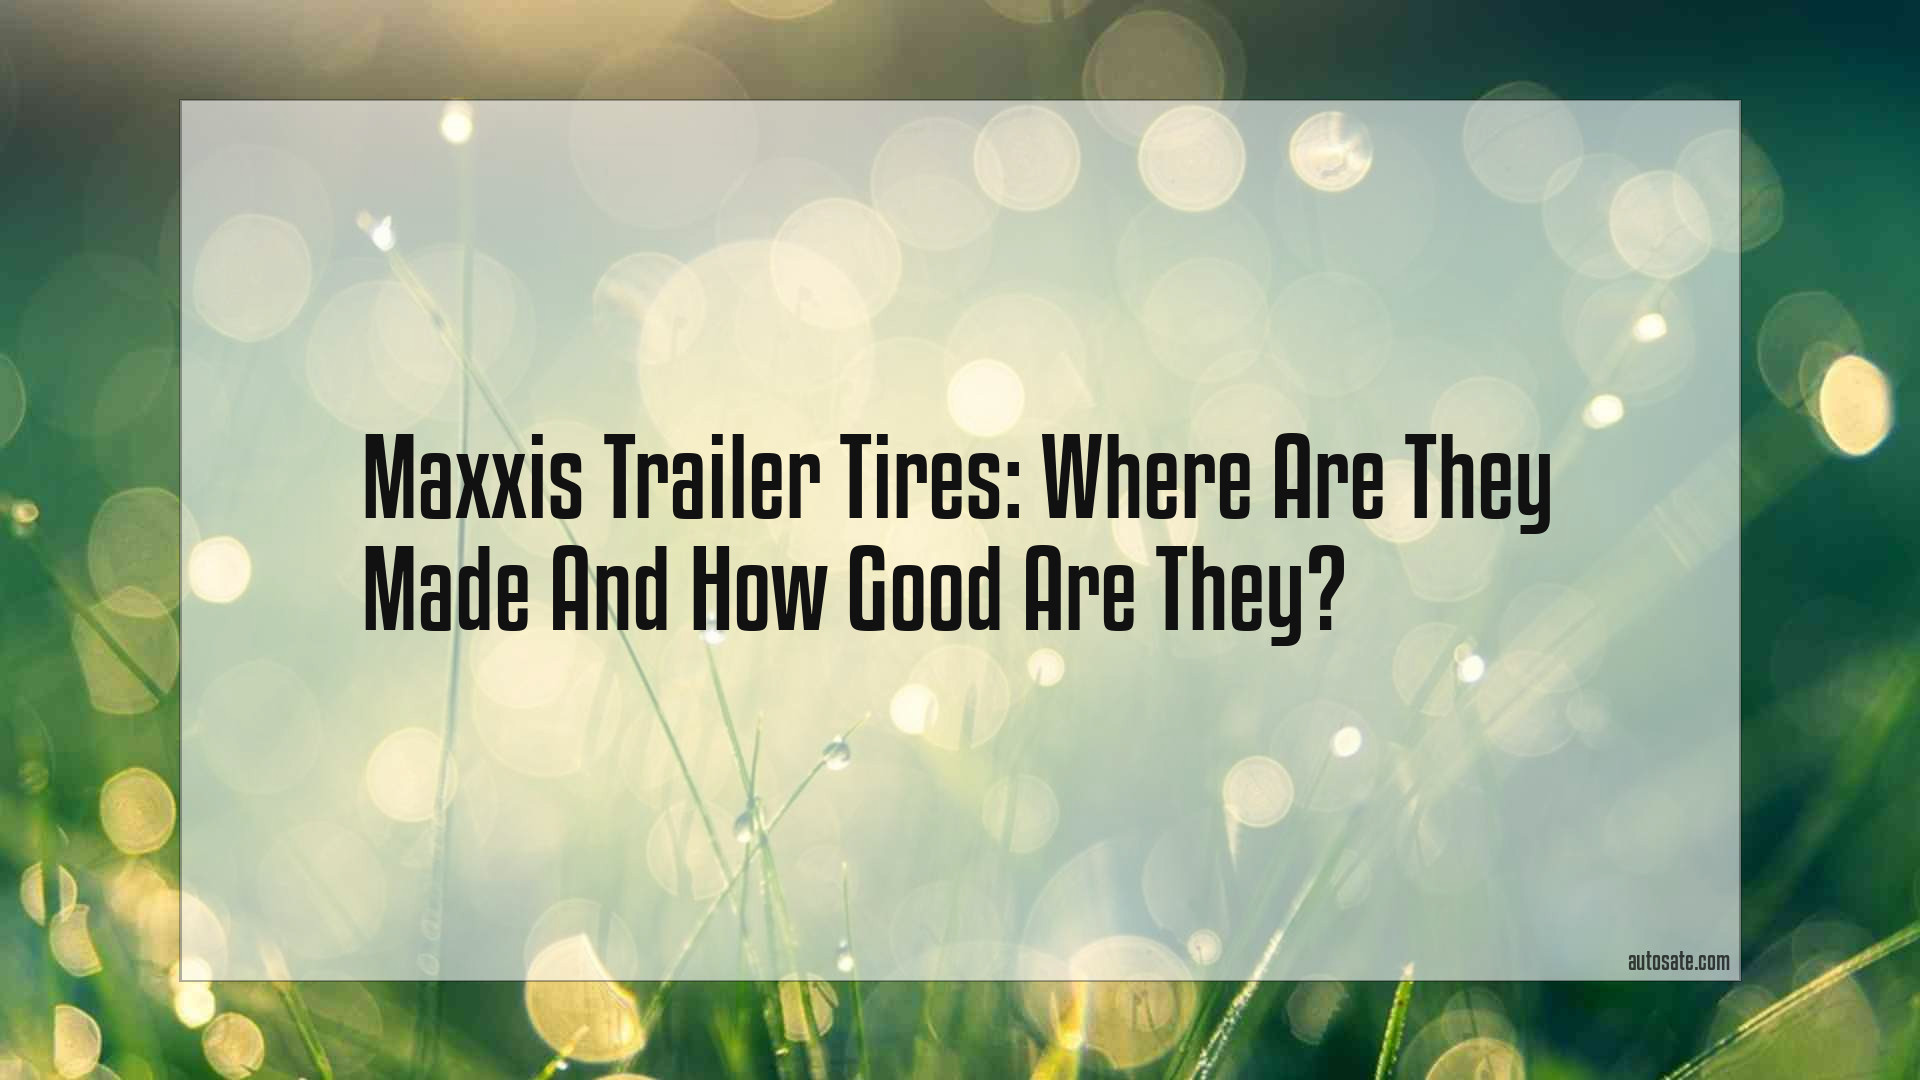 Maxxis Trailer Tires: Where Are They Made And How Good Are They?